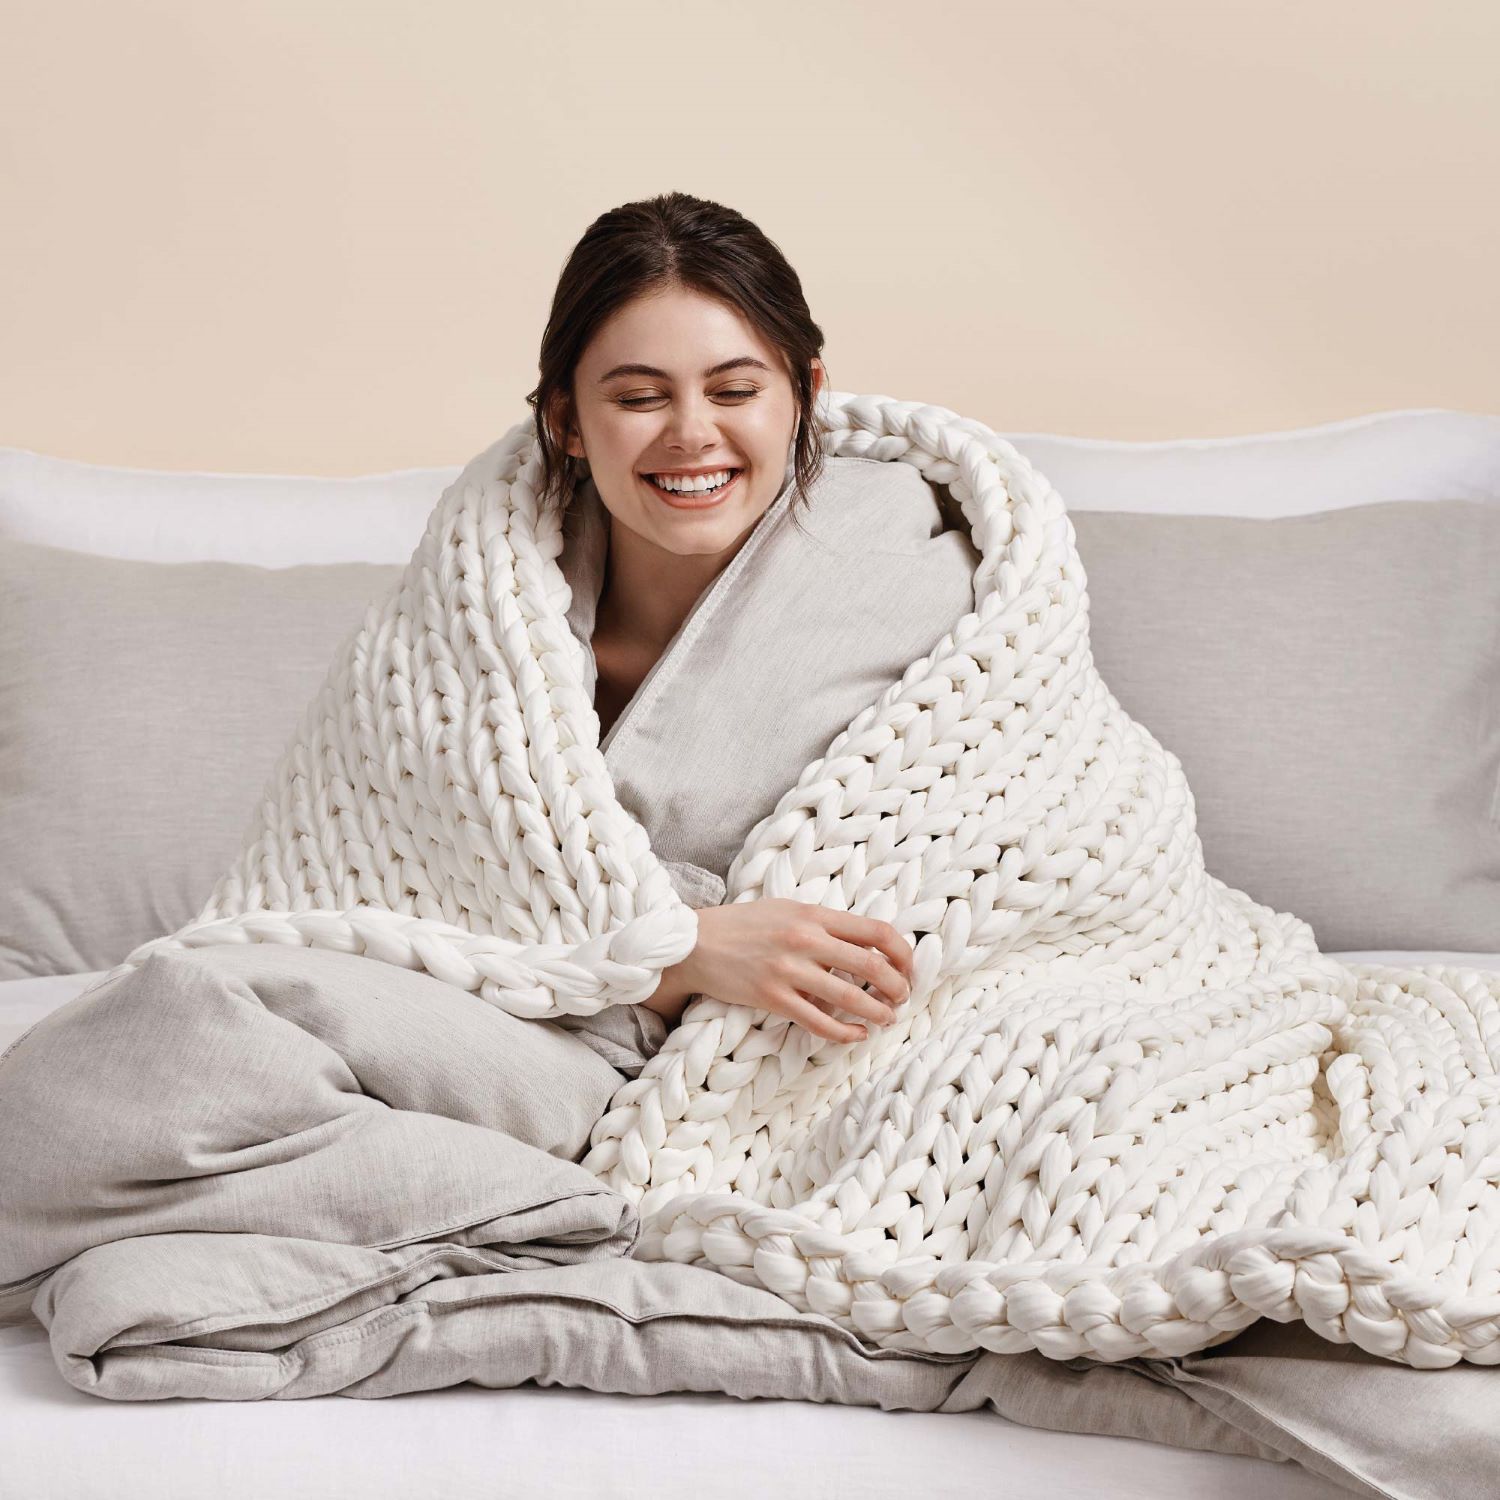 Blanket Vs. Comforter: What's The Difference?